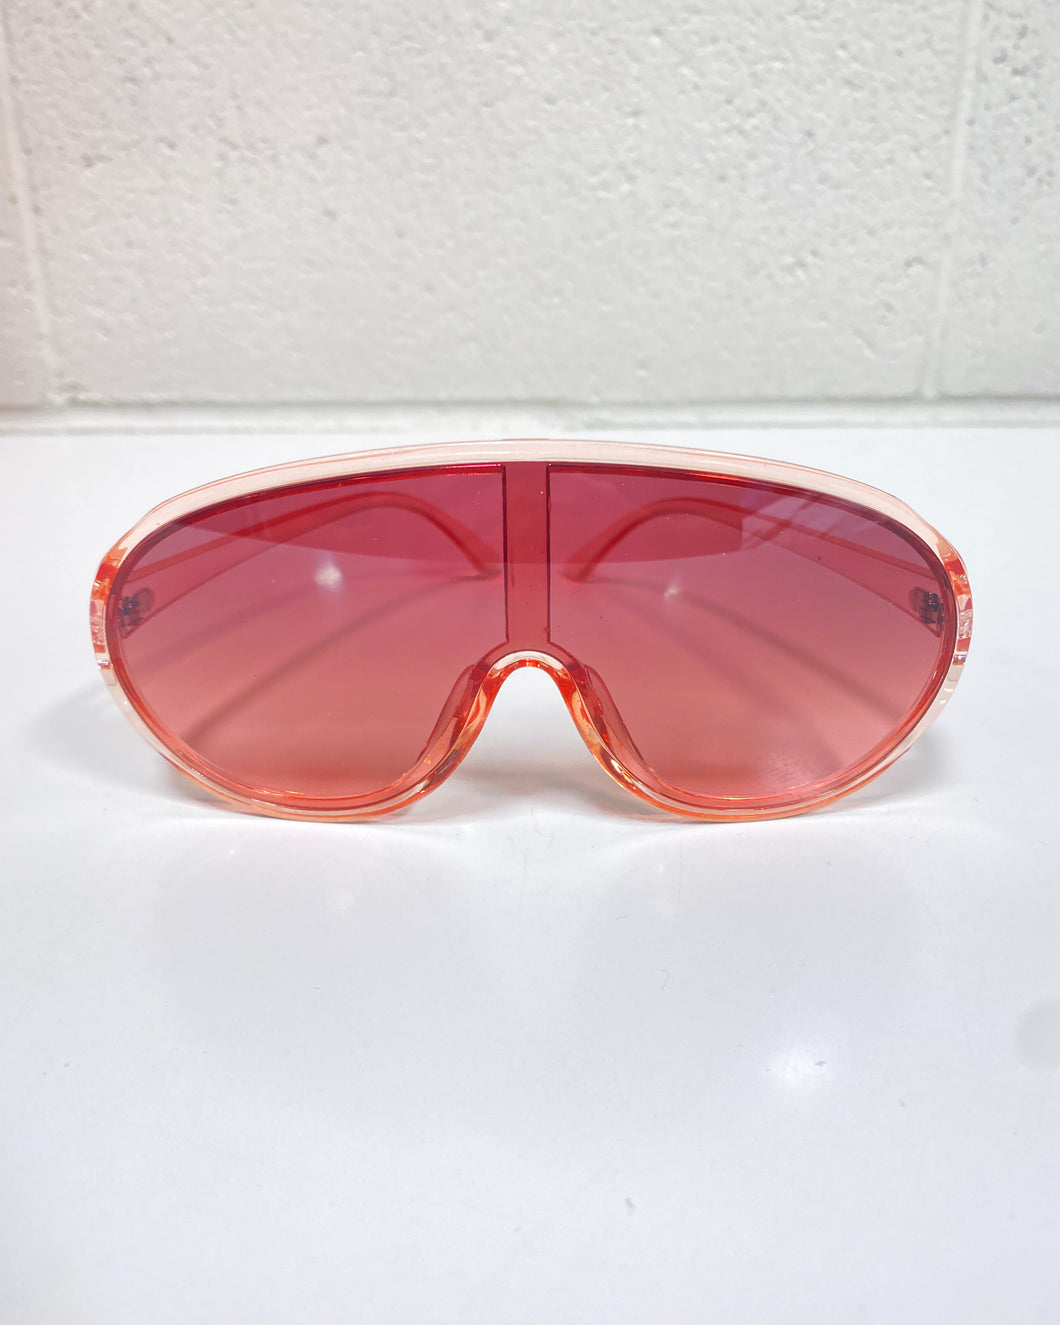 One Piece Rose Colored Sunnies